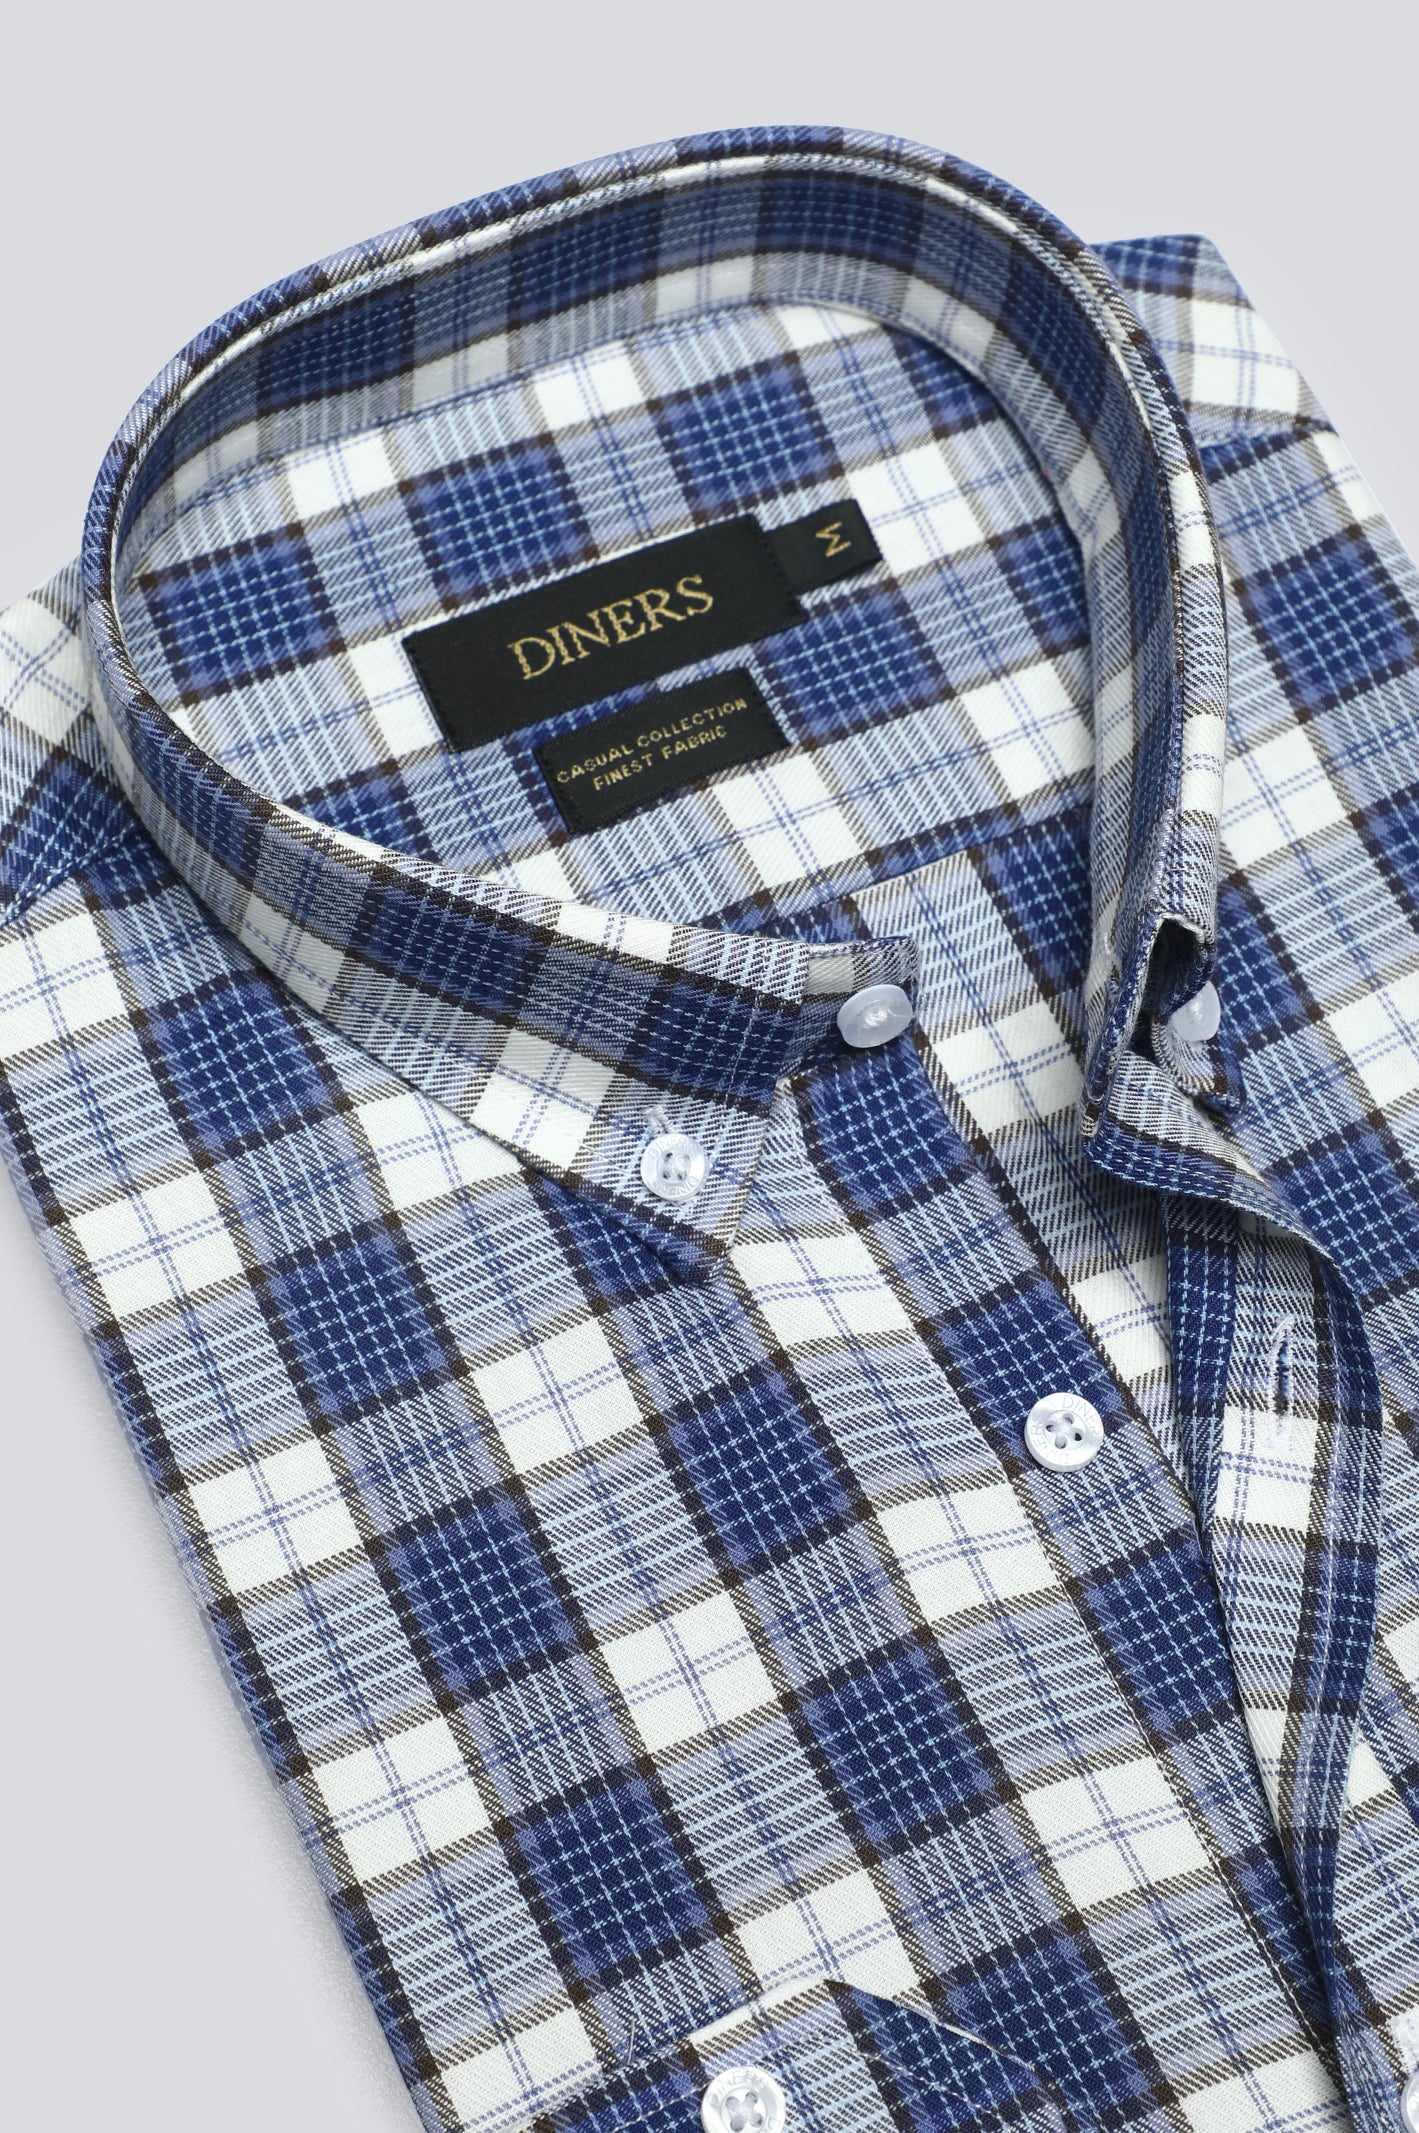 Blue Tattersall Check Casual Shirt From Diners